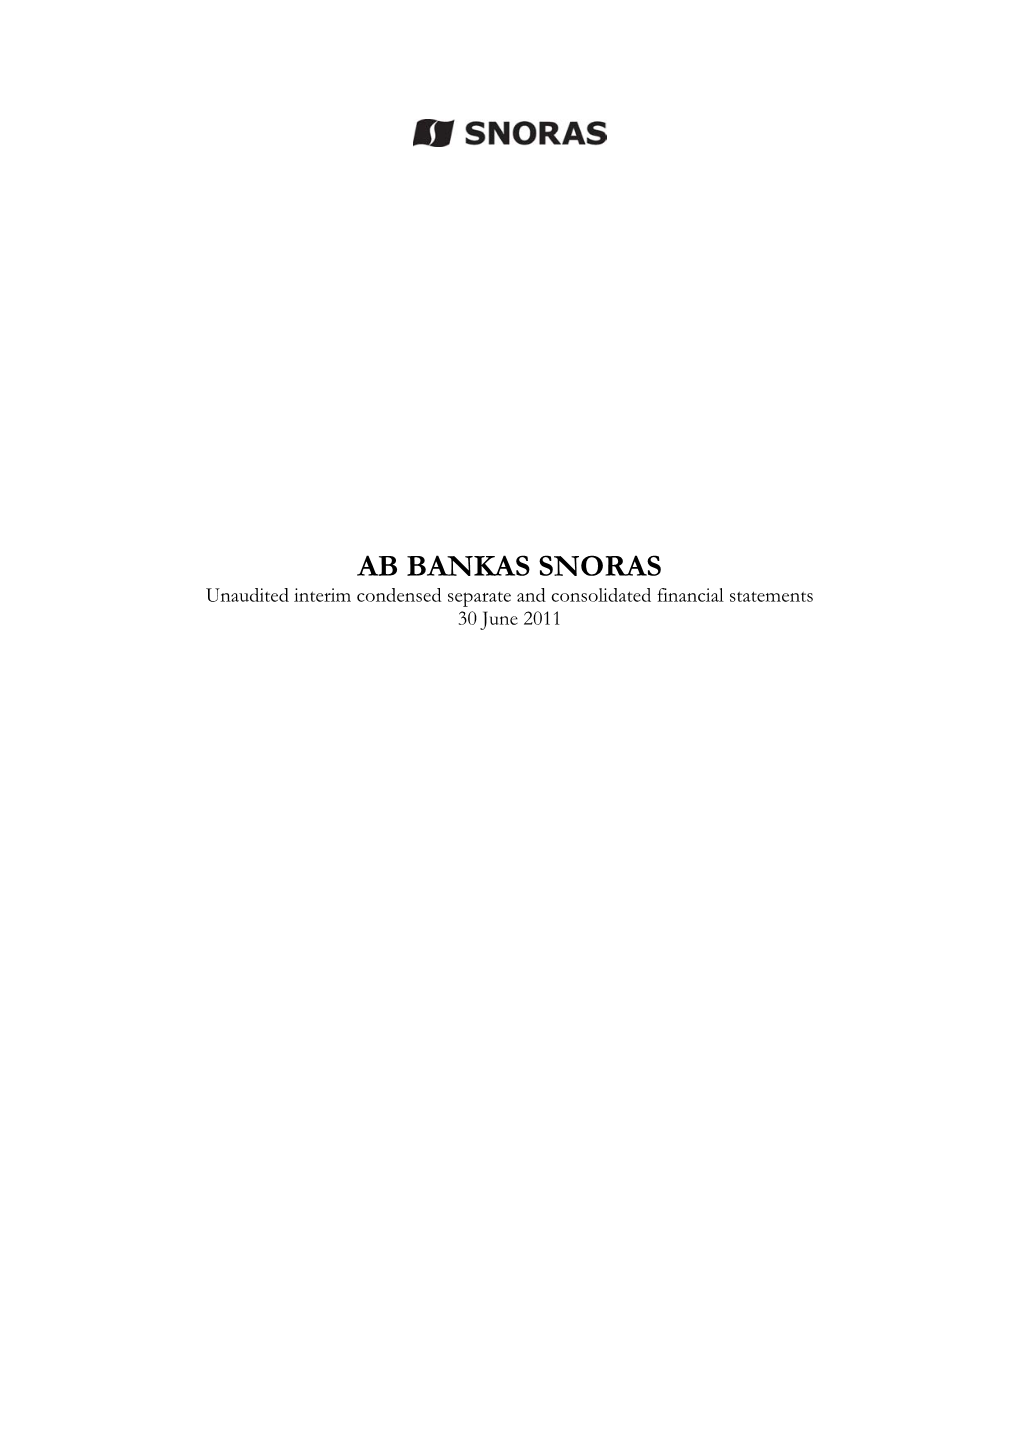 AB BANKAS SNORAS Unaudited Interim Condensed Separate and Consolidated Financial Statements 30 June 2011